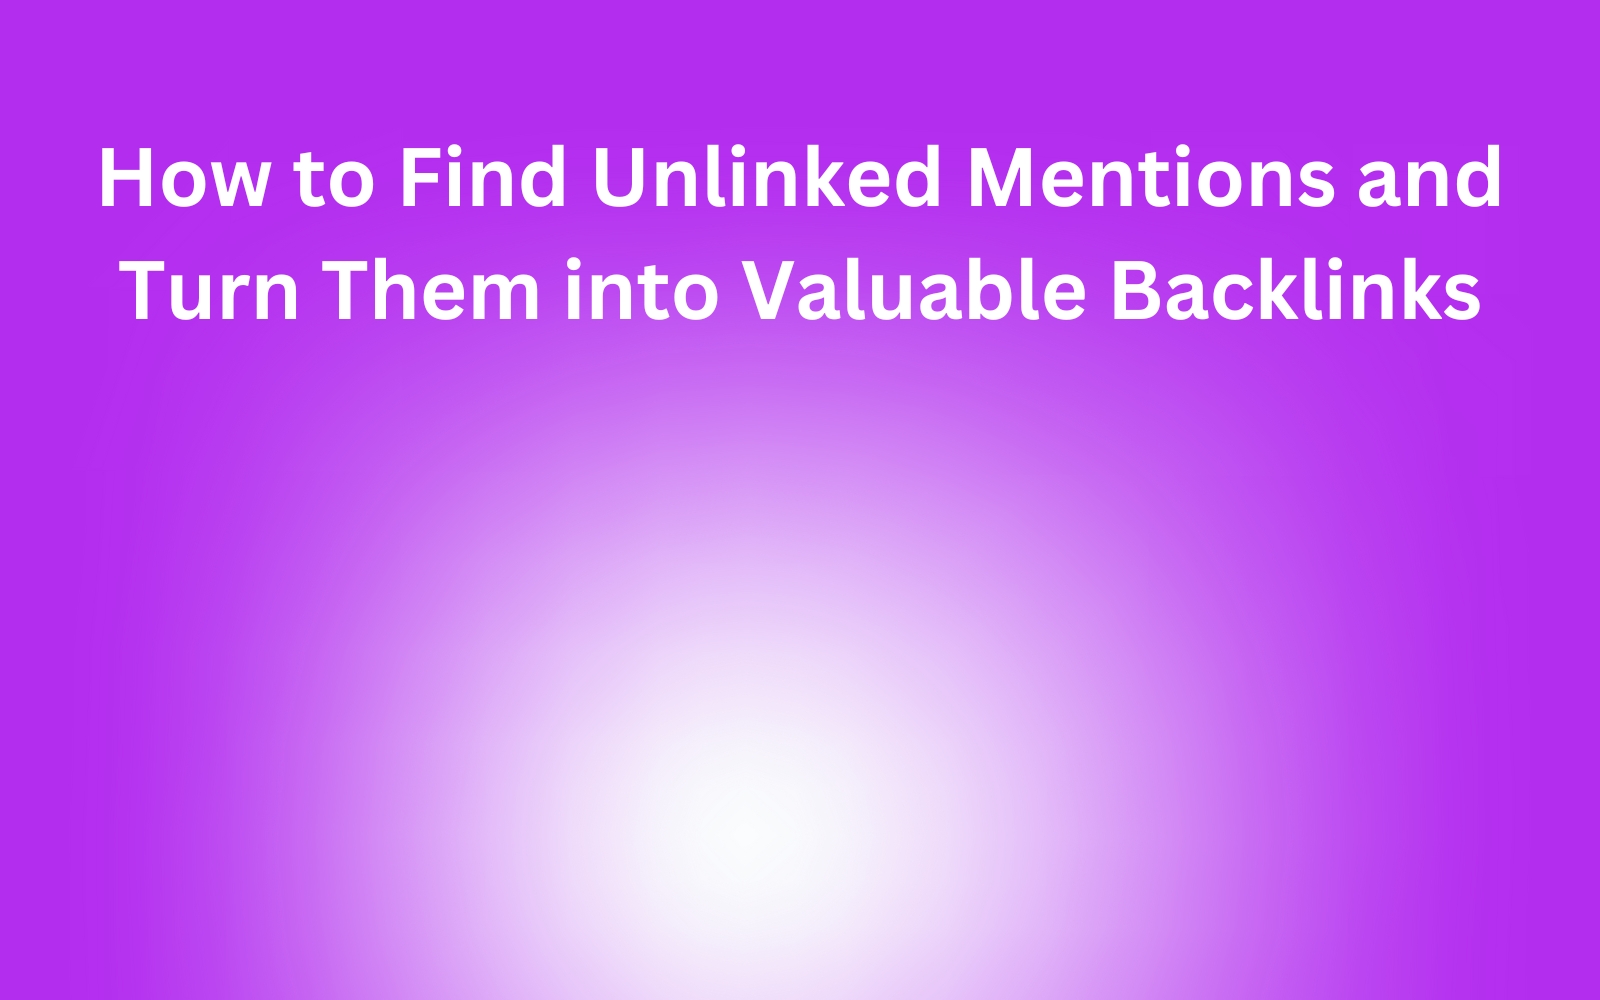 Unlinked mentions